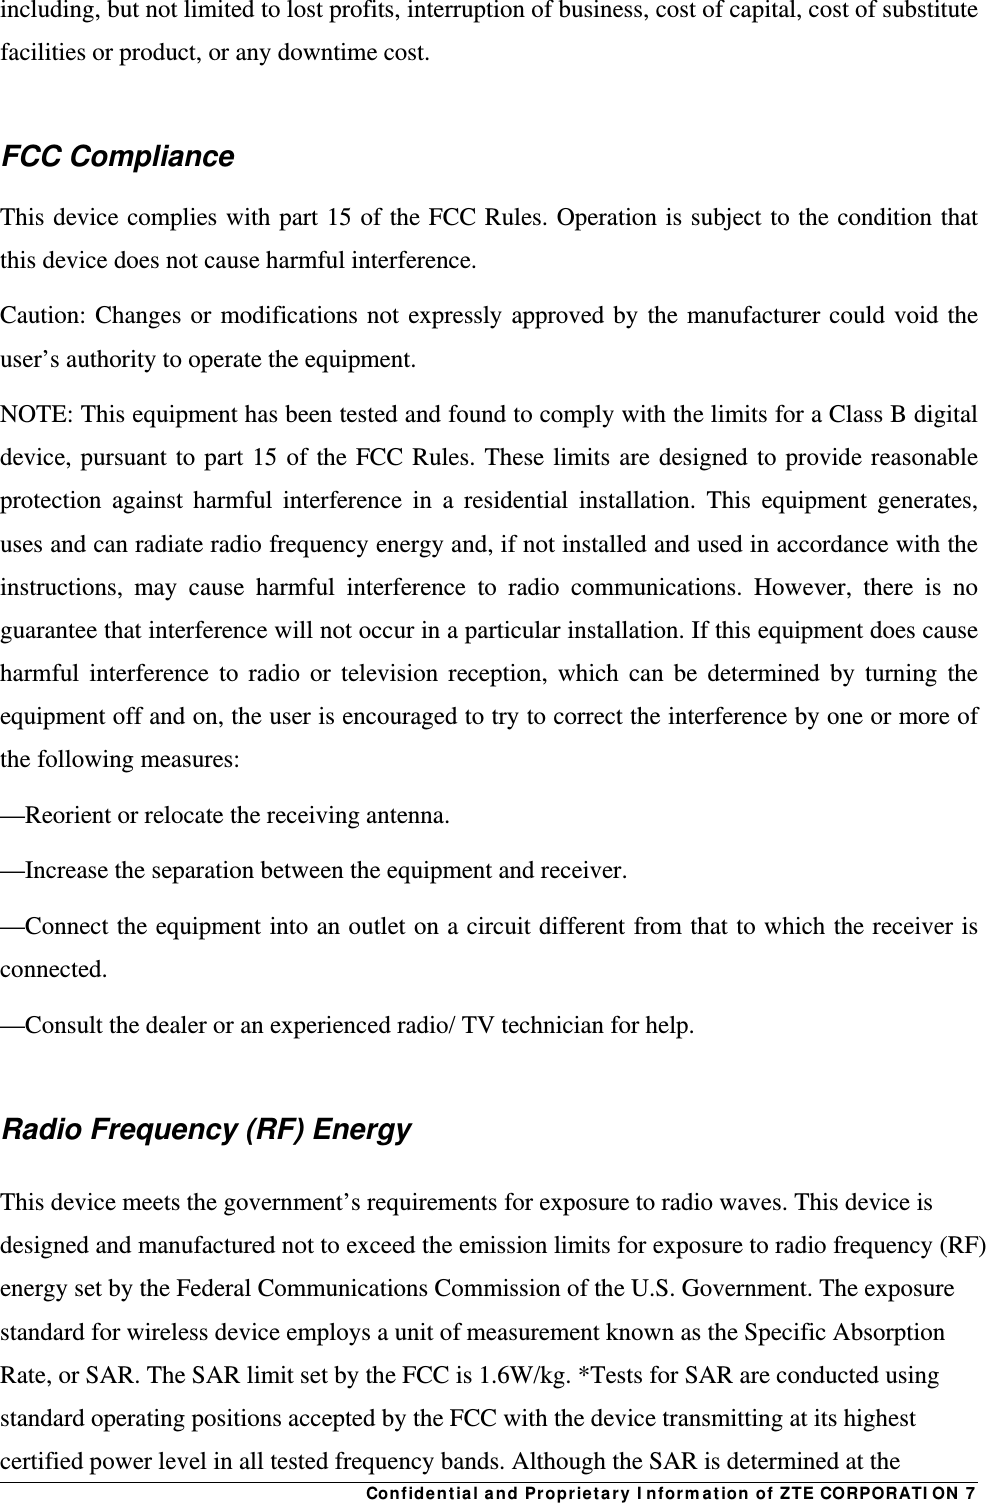 Confidential and Proprietary Information of ZTE CORPORATION 7including, but not limited to lost profits, interruption of business, cost of capital, cost of substitute facilities or product, or any downtime cost.  FCC Compliance   This device complies with part 15 of the FCC Rules. Operation is subject to the condition that this device does not cause harmful interference. Caution: Changes or modifications not expressly approved by the manufacturer could void the user’s authority to operate the equipment. NOTE: This equipment has been tested and found to comply with the limits for a Class B digital device, pursuant to part 15 of the FCC Rules. These limits are designed to provide reasonable protection against harmful interference in a residential installation. This equipment generates, uses and can radiate radio frequency energy and, if not installed and used in accordance with the instructions, may cause harmful interference to radio communications. However, there is no guarantee that interference will not occur in a particular installation. If this equipment does cause harmful interference to radio or television reception, which can be determined by turning the equipment off and on, the user is encouraged to try to correct the interference by one or more of the following measures: —Reorient or relocate the receiving antenna. —Increase the separation between the equipment and receiver. —Connect the equipment into an outlet on a circuit different from that to which the receiver is connected. —Consult the dealer or an experienced radio/ TV technician for help.  Radio Frequency (RF) Energy This device meets the government’s requirements for exposure to radio waves. This device is designed and manufactured not to exceed the emission limits for exposure to radio frequency (RF) energy set by the Federal Communications Commission of the U.S. Government. The exposure standard for wireless device employs a unit of measurement known as the Specific Absorption Rate, or SAR. The SAR limit set by the FCC is 1.6W/kg. *Tests for SAR are conducted using standard operating positions accepted by the FCC with the device transmitting at its highest certified power level in all tested frequency bands. Although the SAR is determined at the 